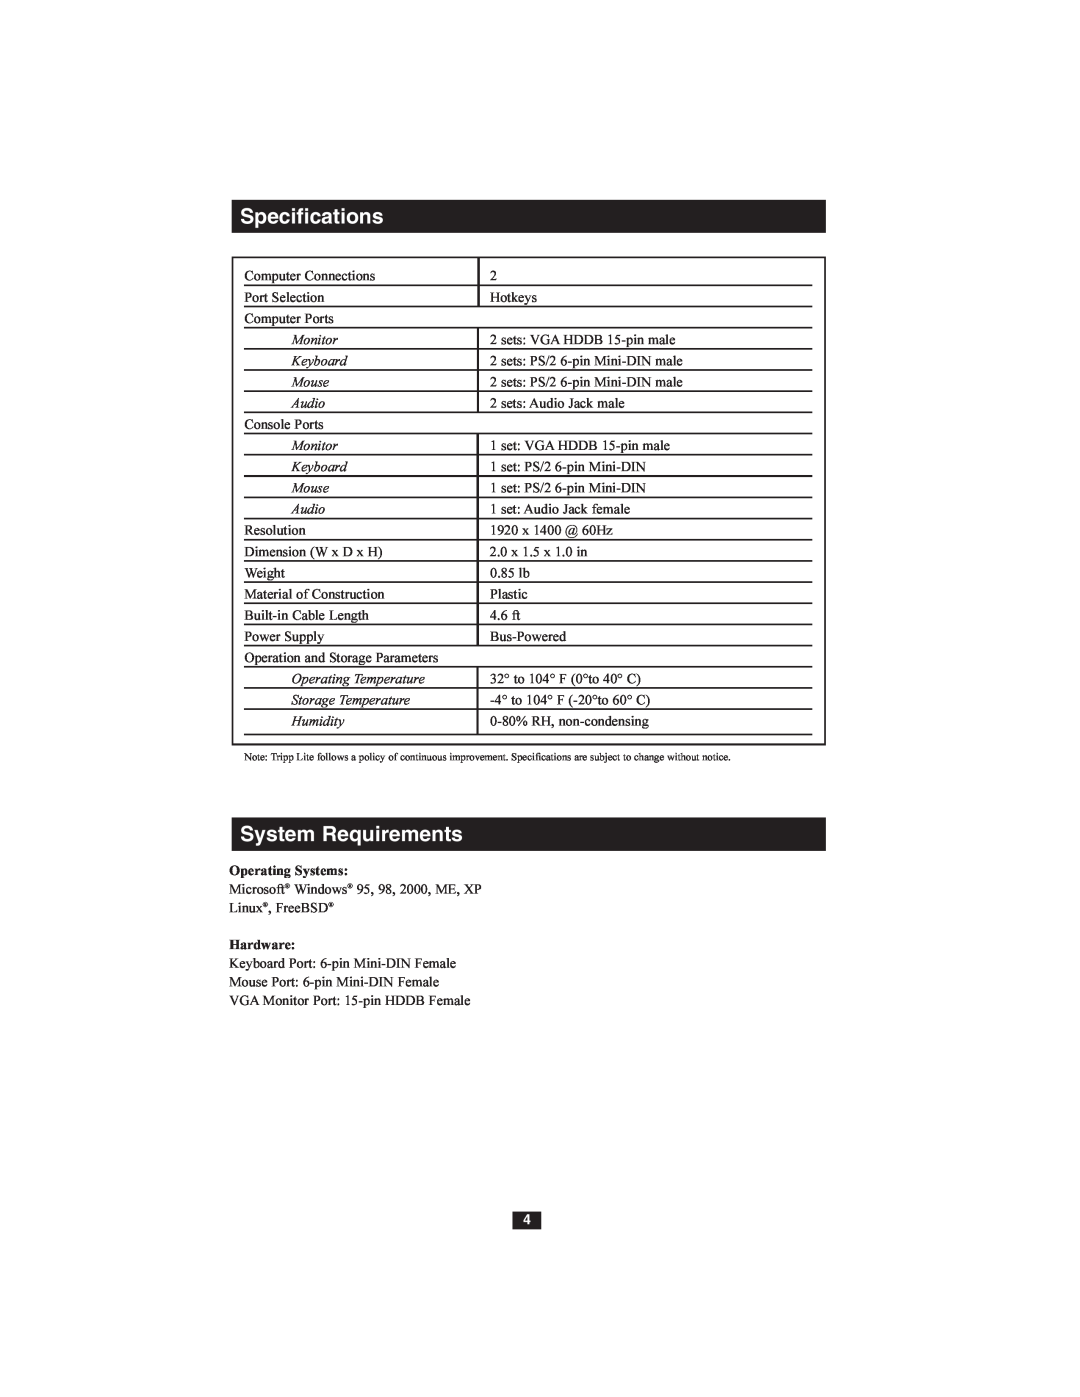 Tripp Lite B032-002-R owner manual Specifications, System Requirements 